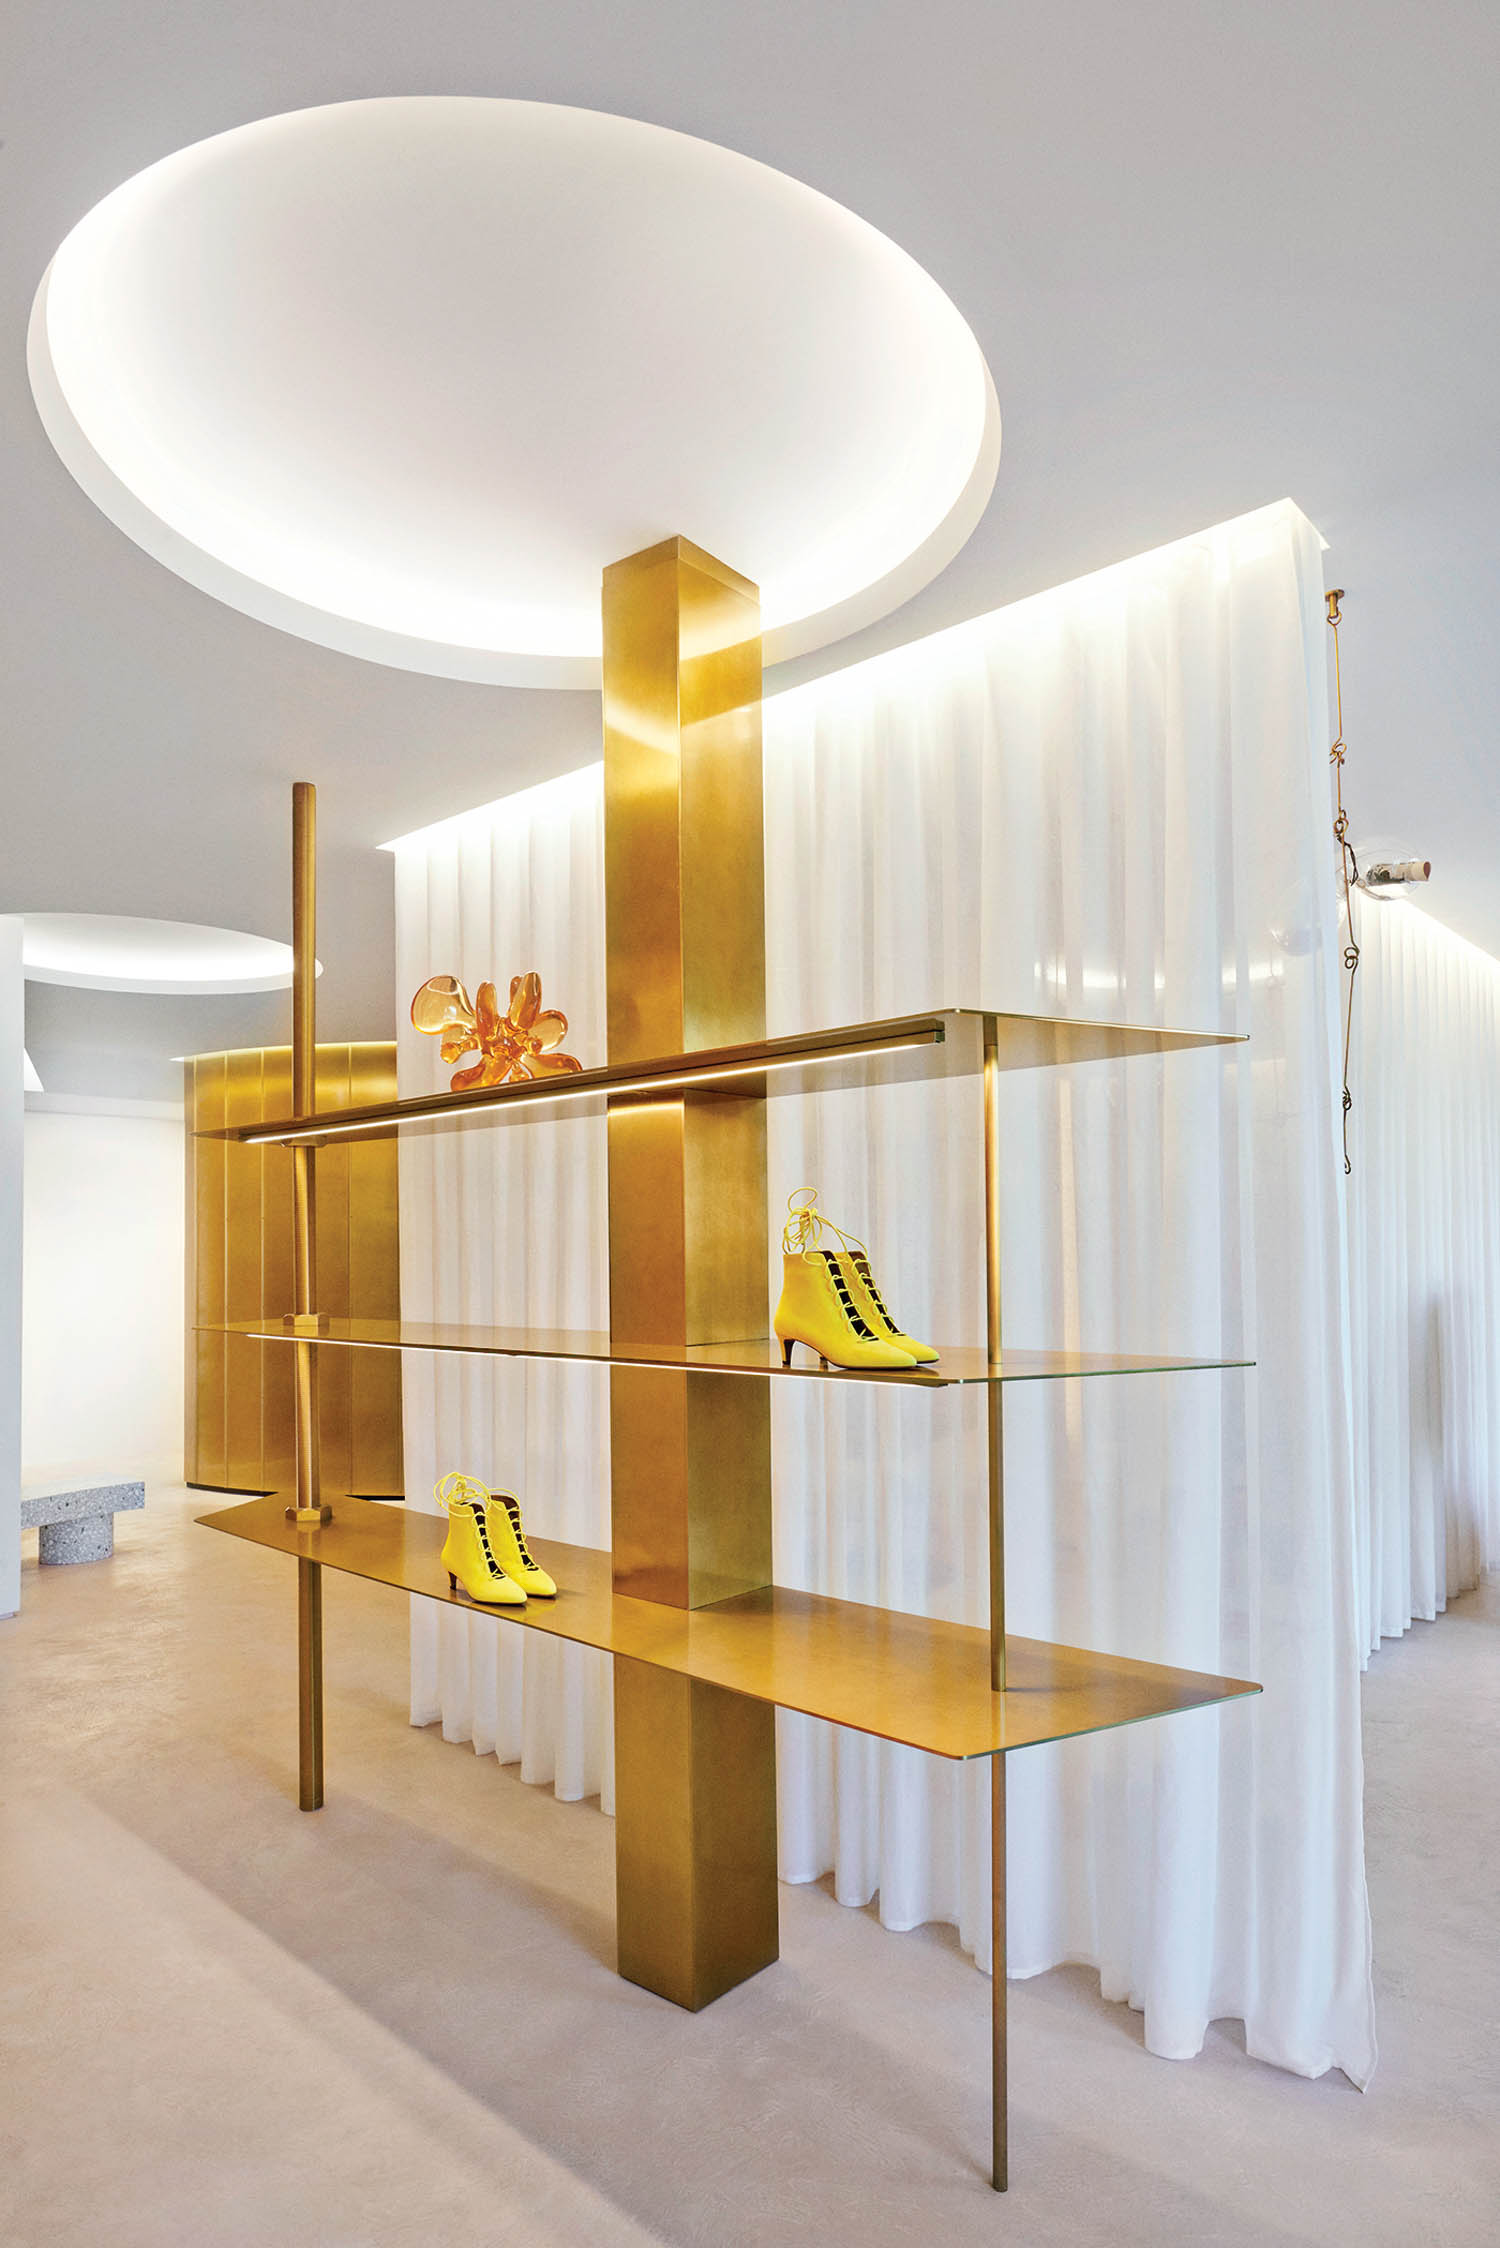 gold shelves display women's shoes